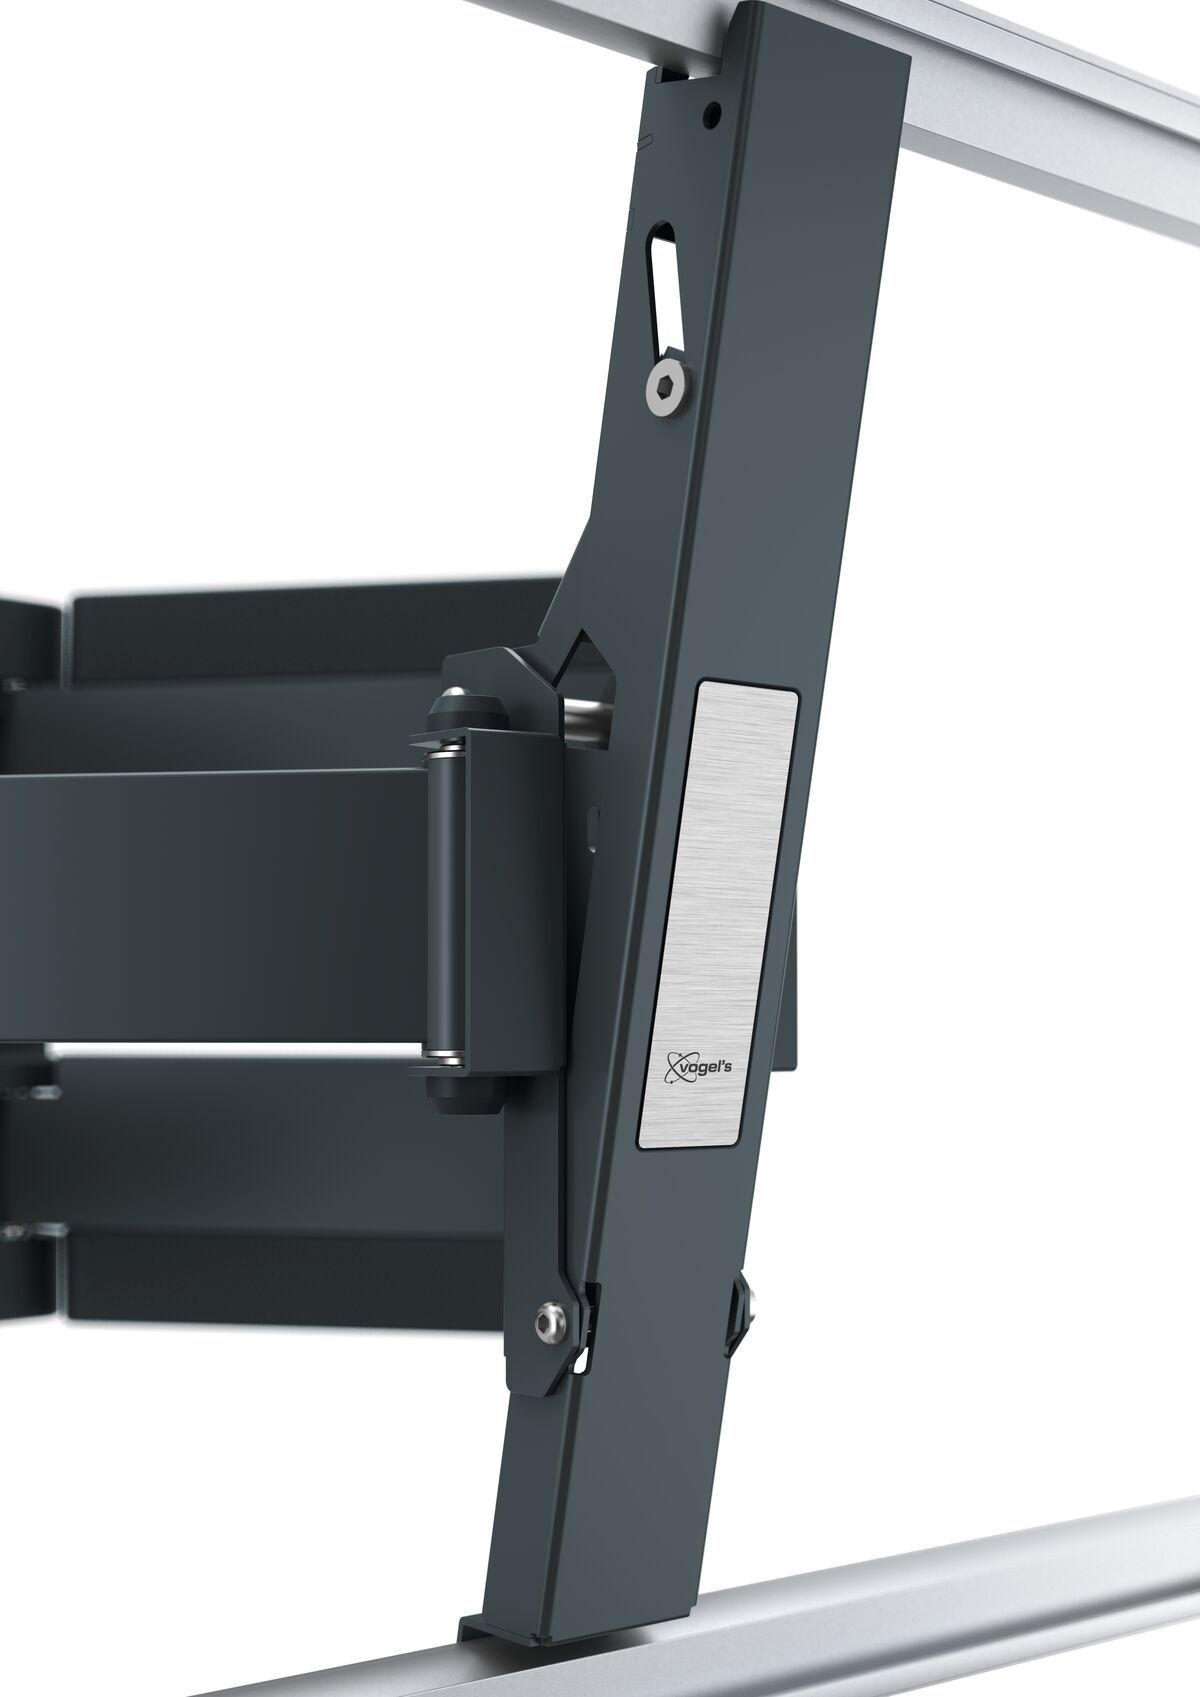 Vogel's THIN 550 wall mount